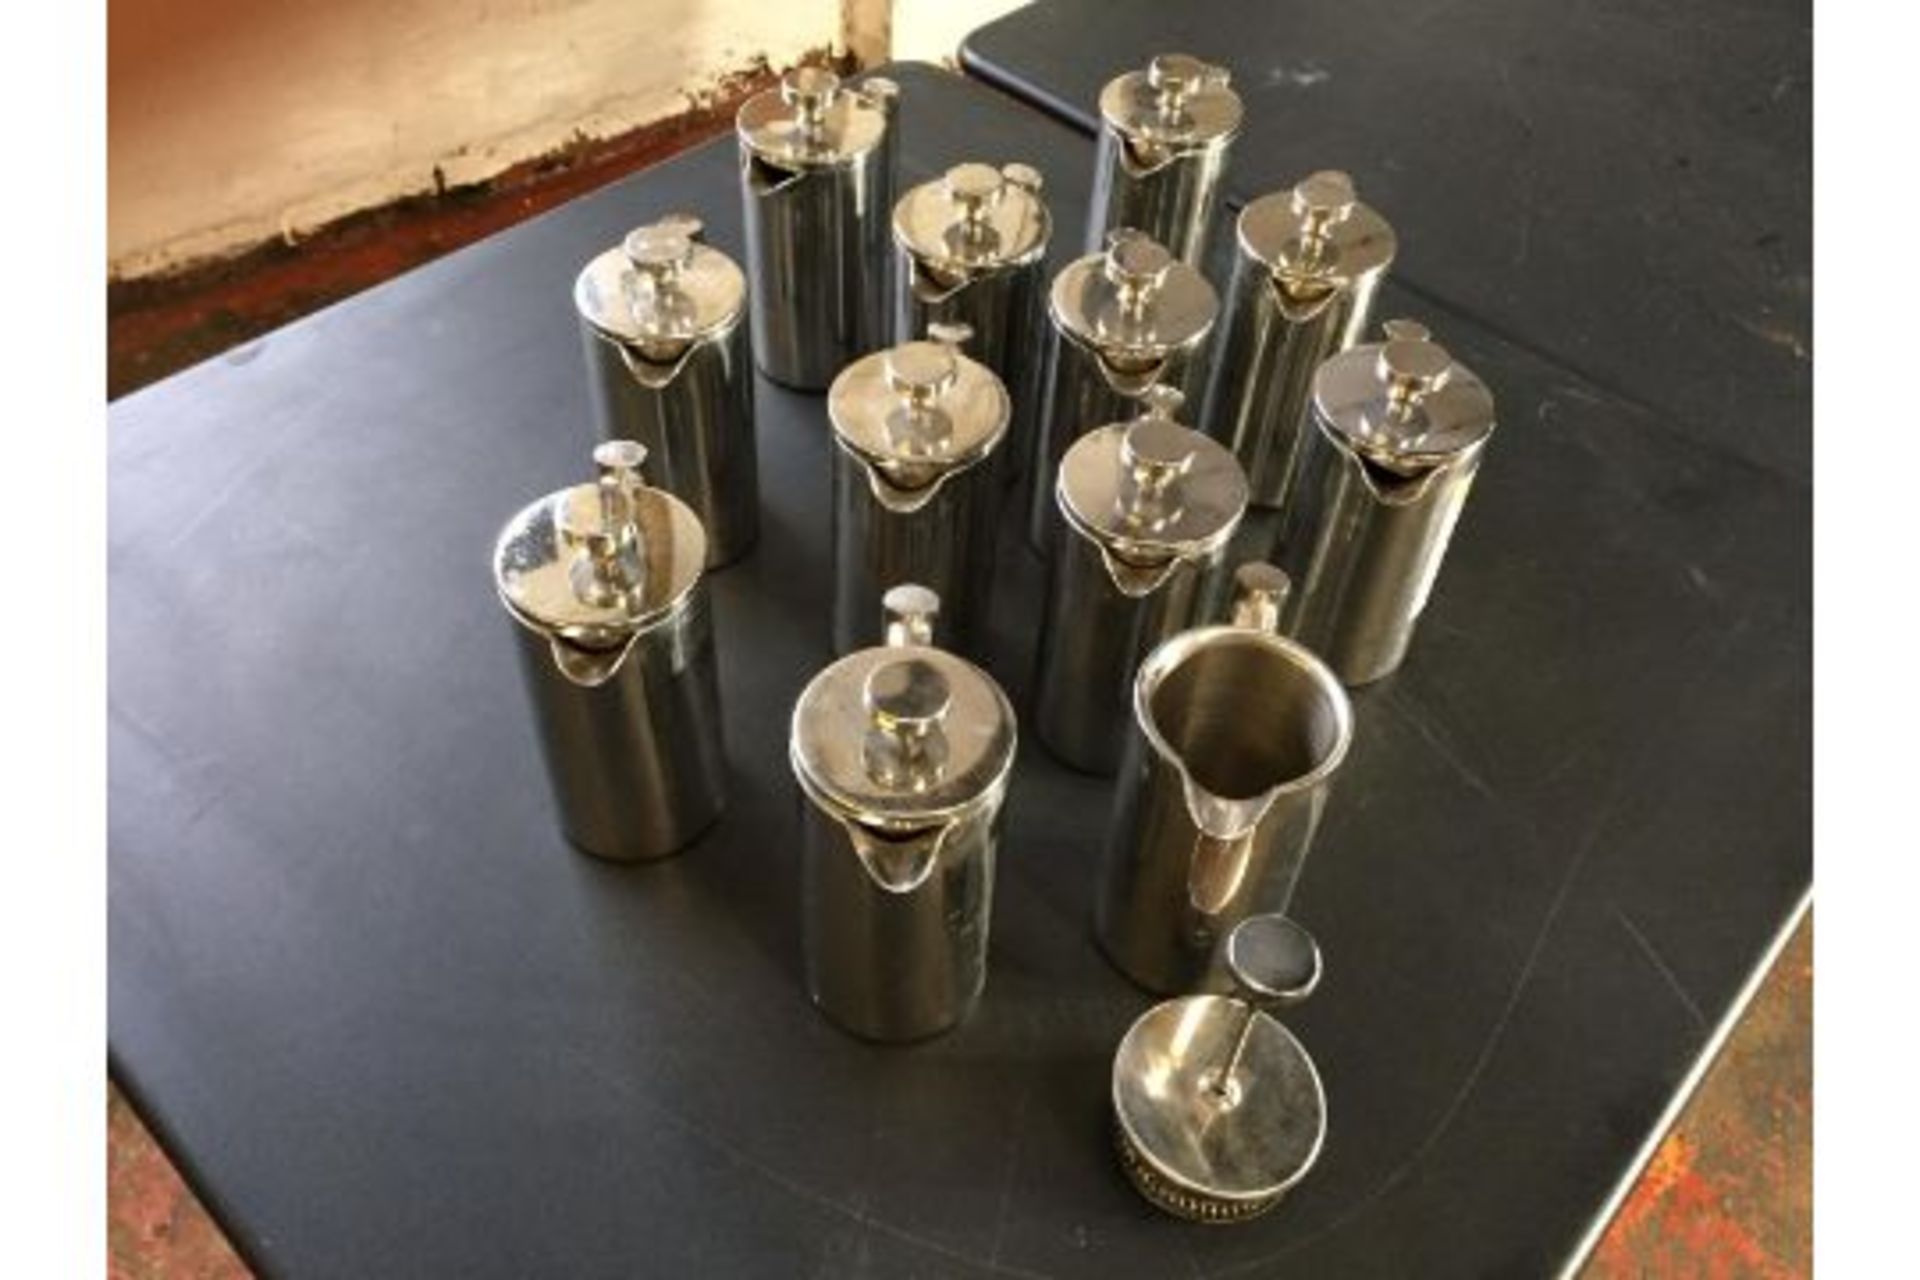 Stainless steel coffee pots - Image 4 of 4